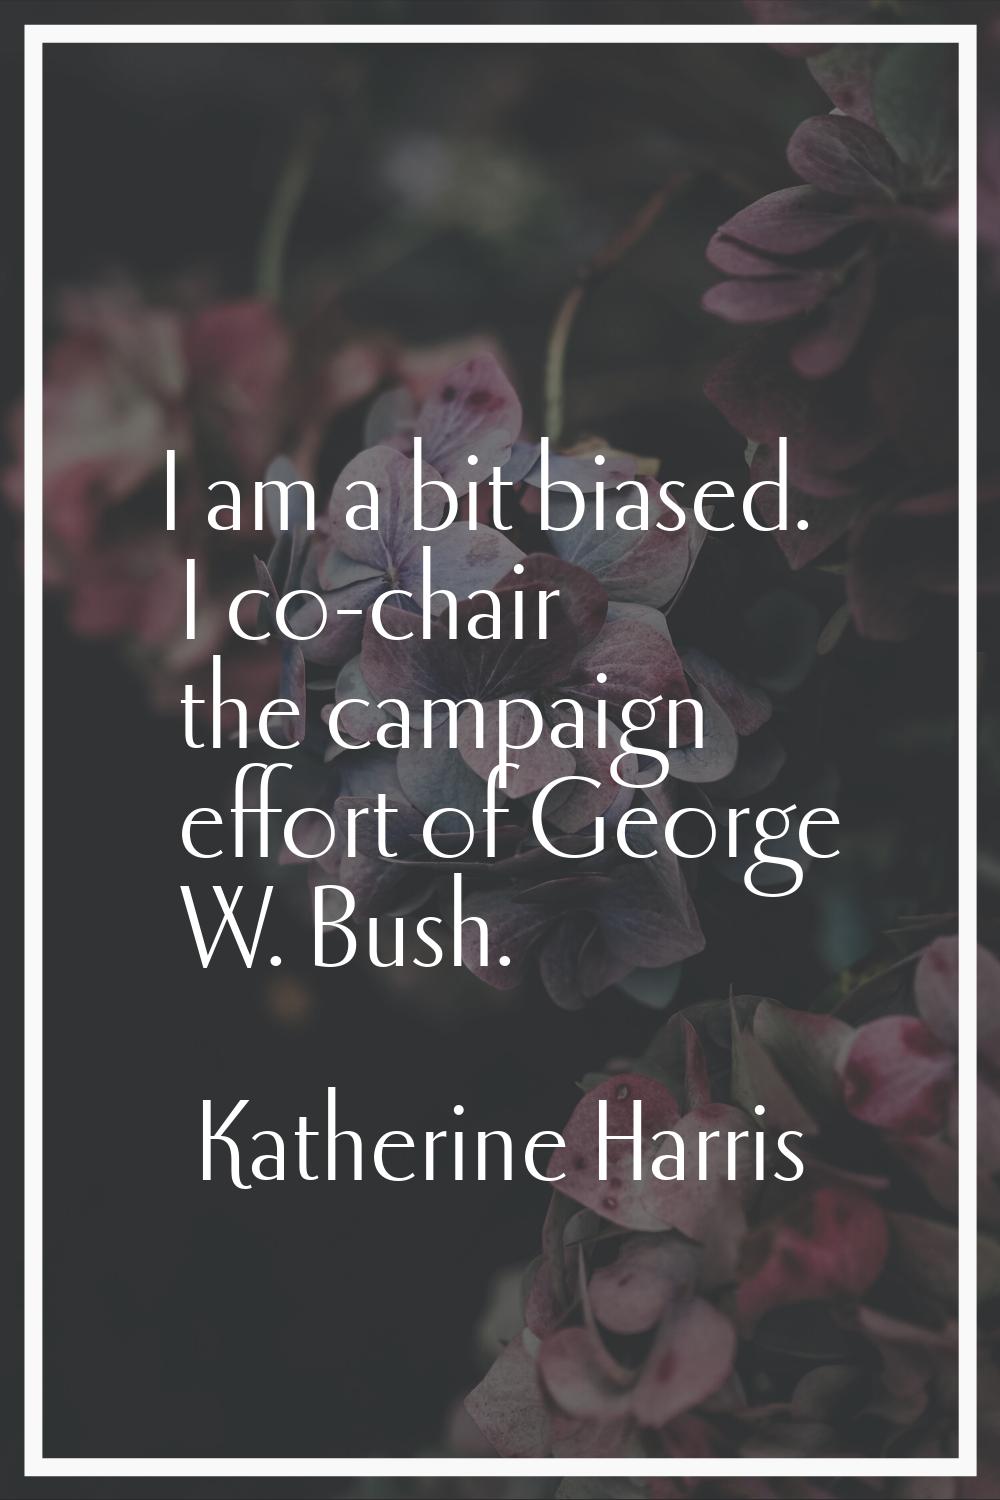 I am a bit biased. I co-chair the campaign effort of George W. Bush.